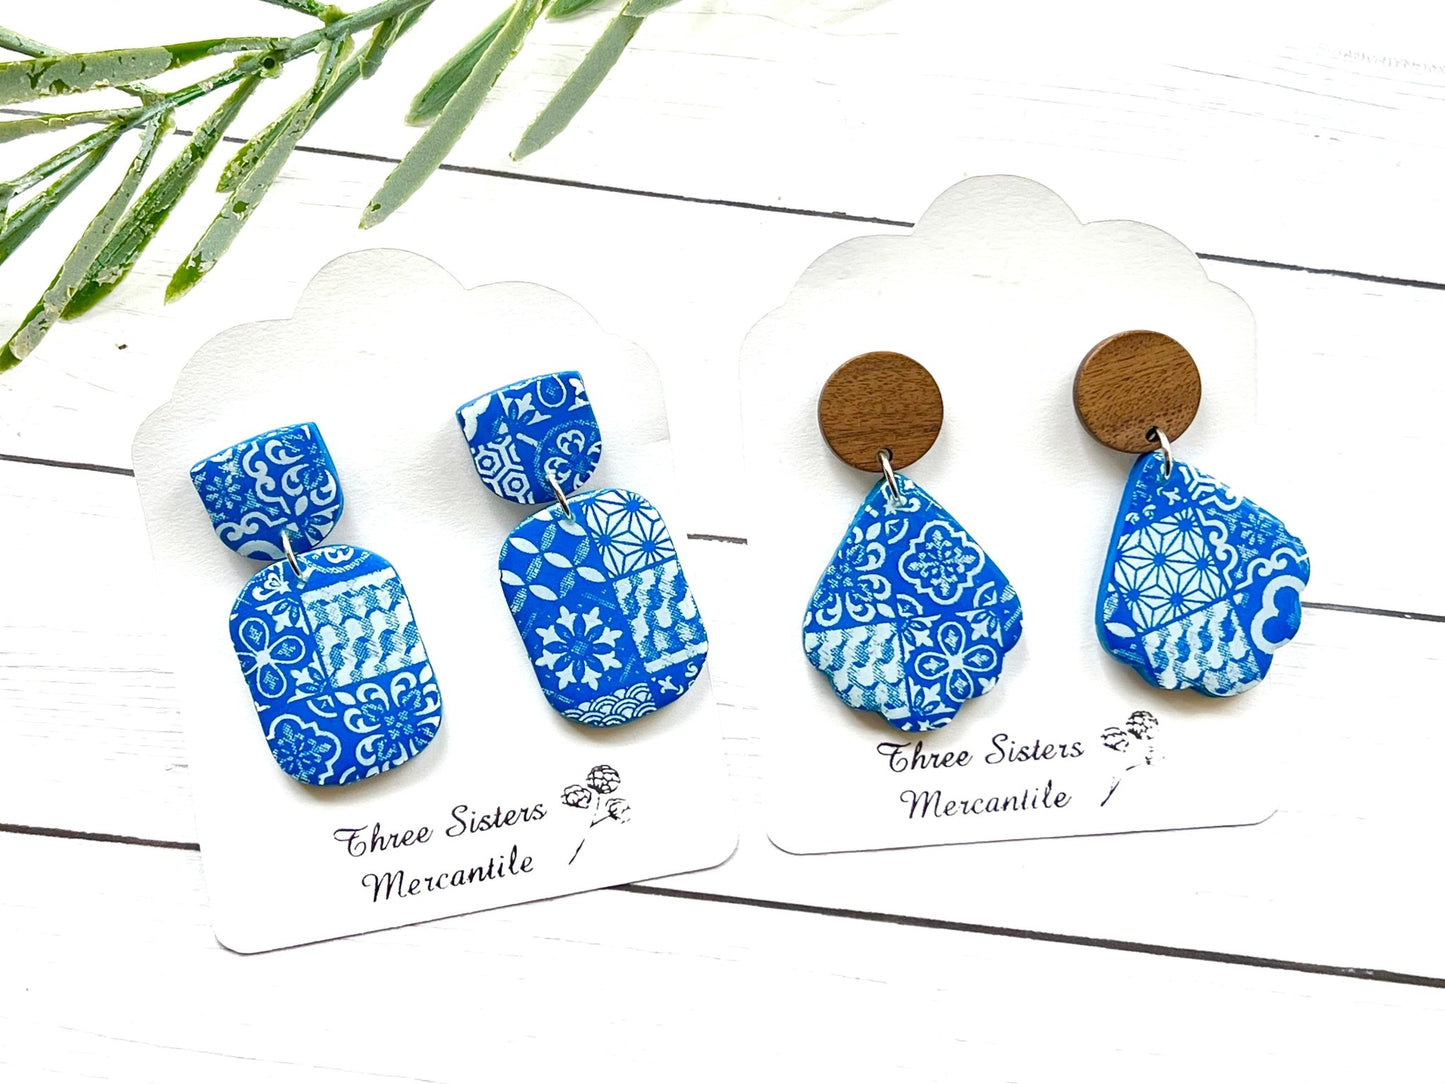 Clay earrings- Blue and White